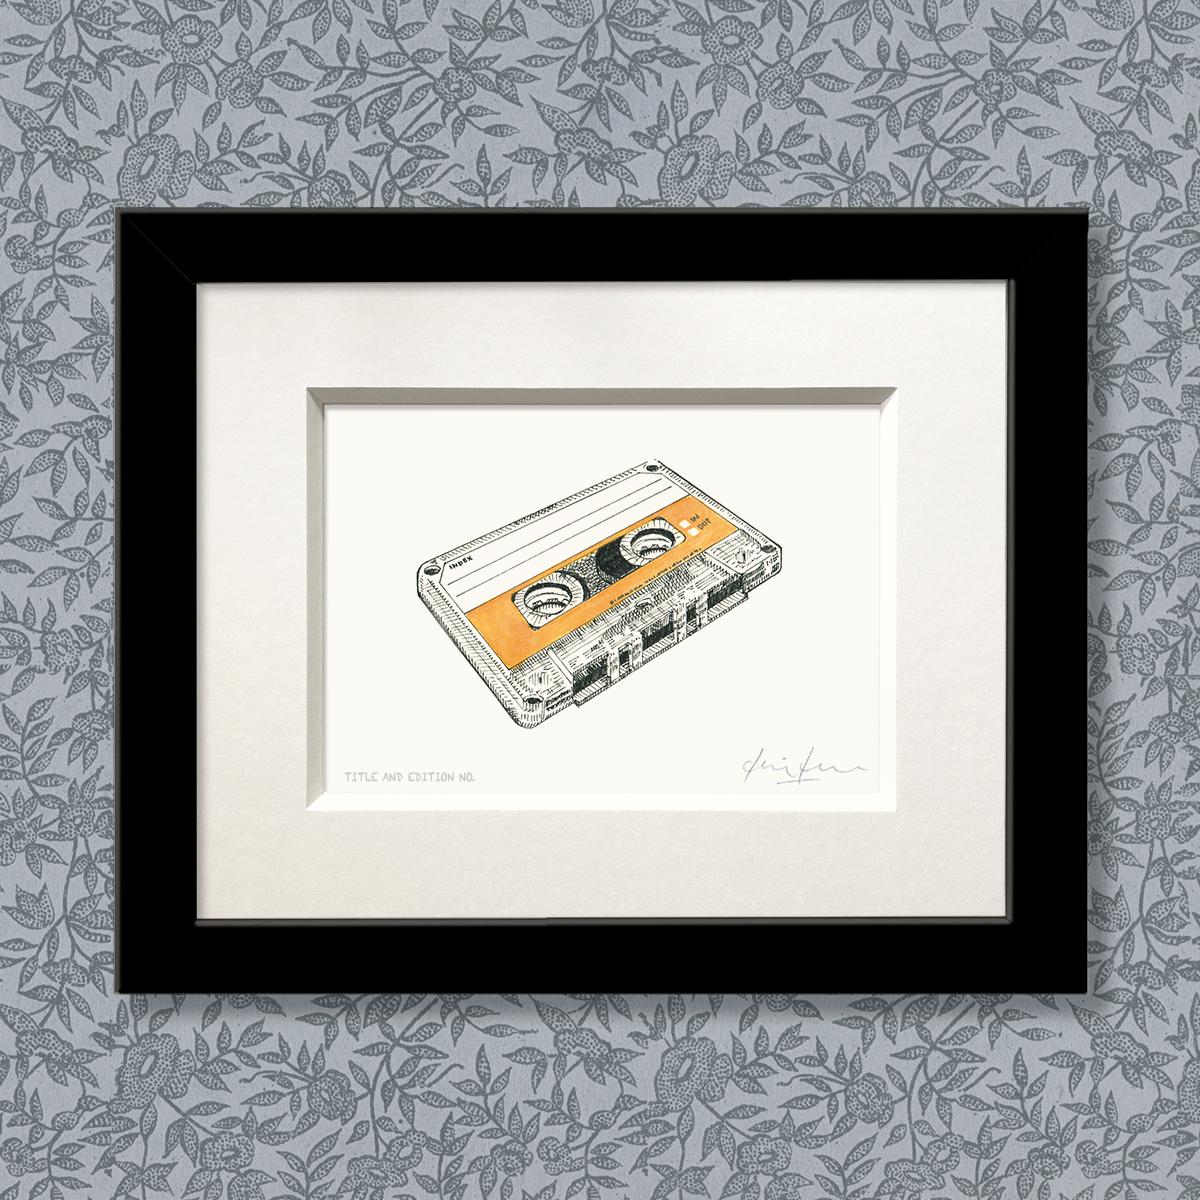 Limited edition print from pen, ink and watercolour sketch of a cassette tape in a black frame